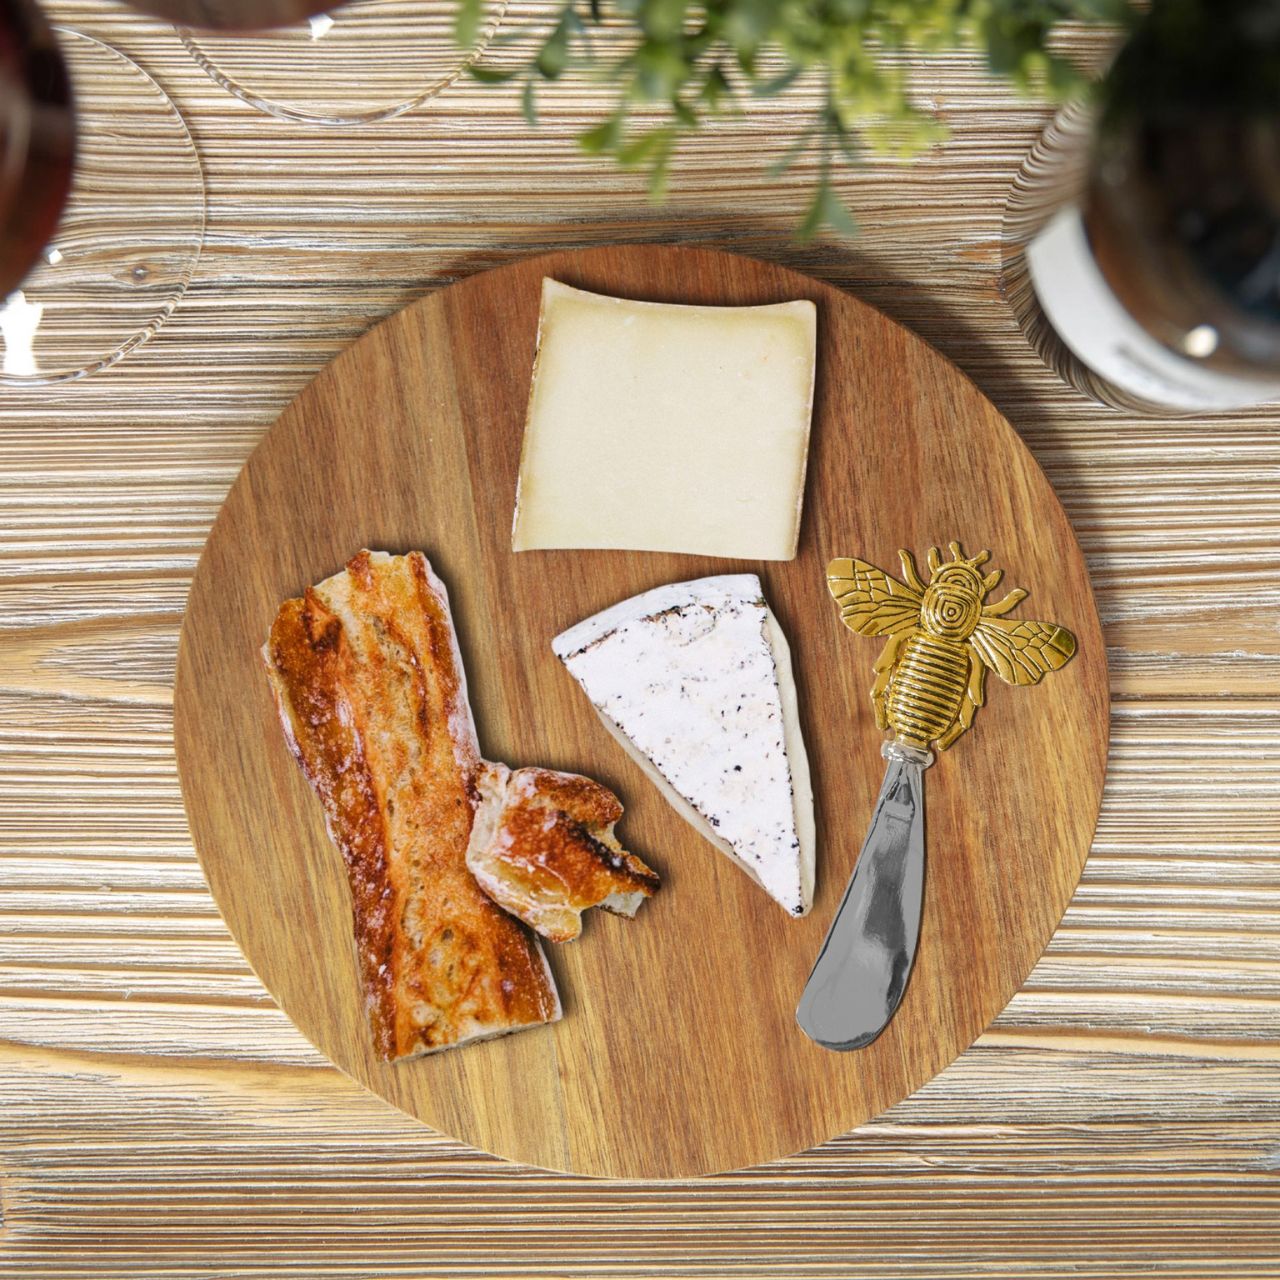 Round Acacia Cheese Board with Spreader Bee Design  A beautiful round acacia wood cheese board with gold bee stainless steel cheese spreader in a branded gift box. From the Cheese & Wine Gifts collection by HESTIA - elegant gifts for the sophisticated partygoer.